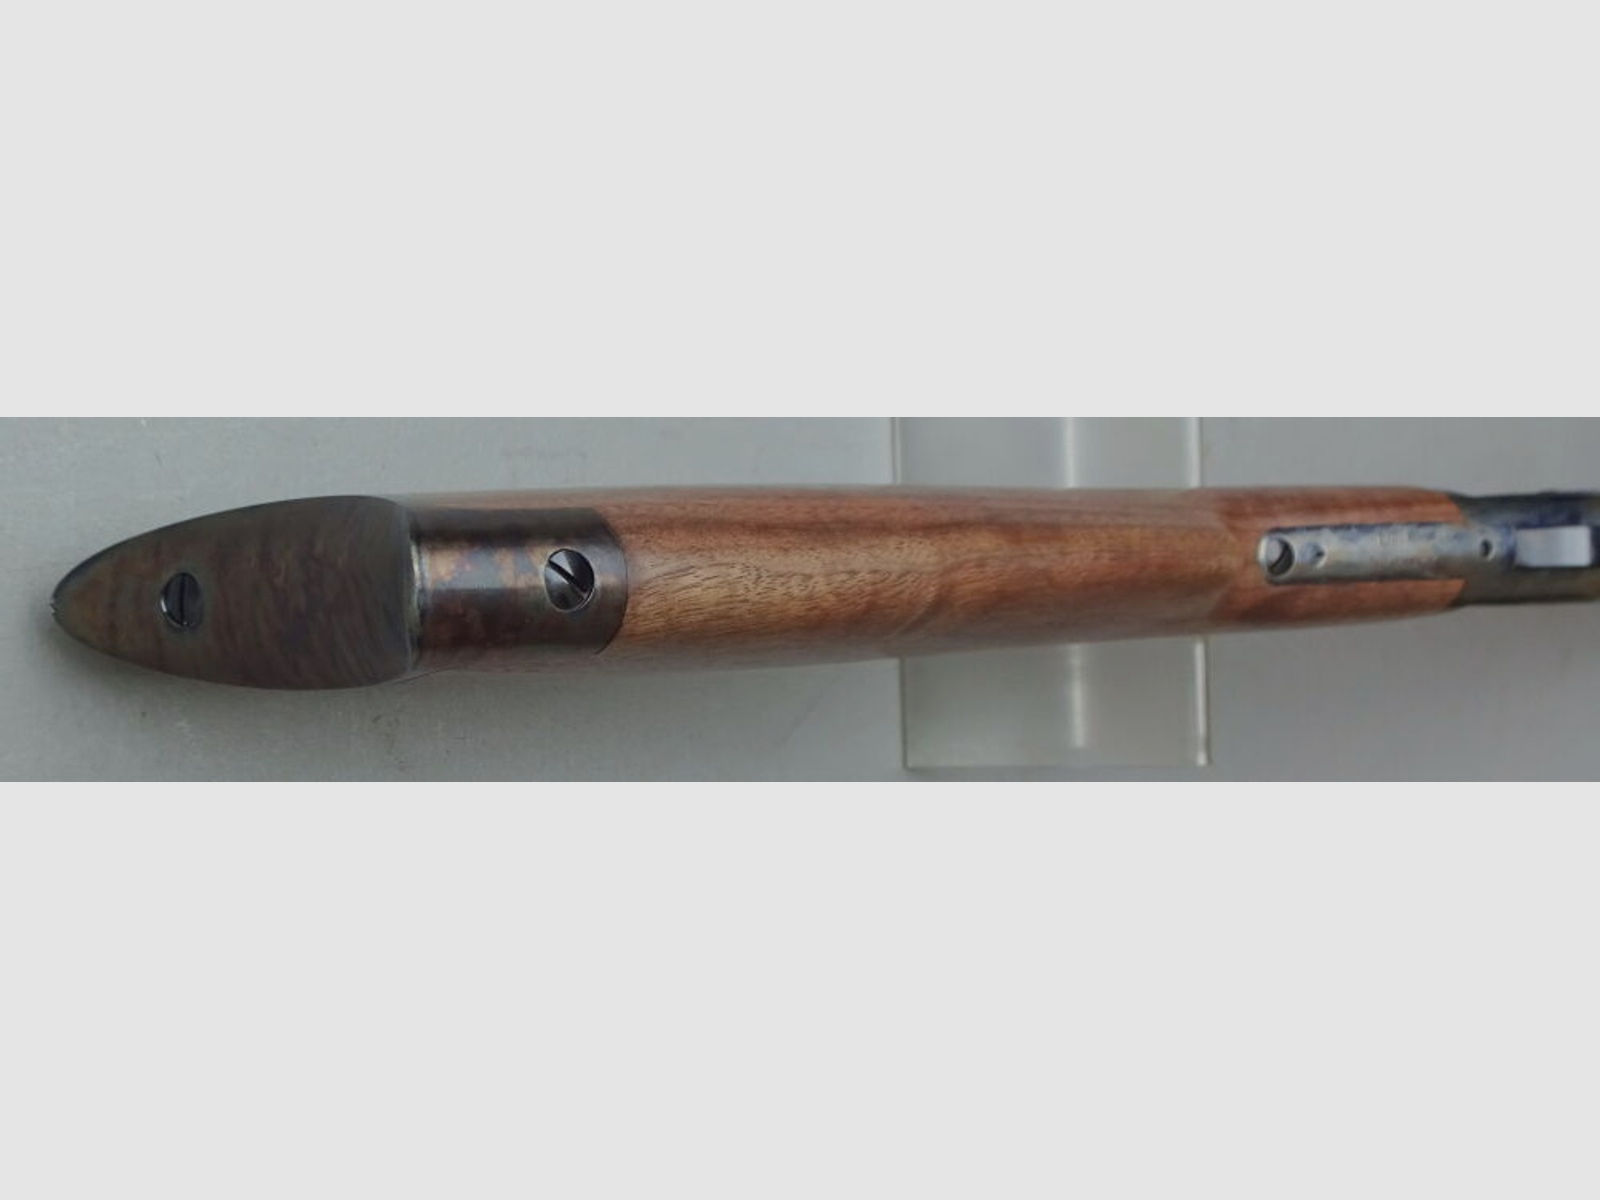 WINCHESTER ARMS	 Mod. 1873 Sporter - 8-kant Lauf 24"